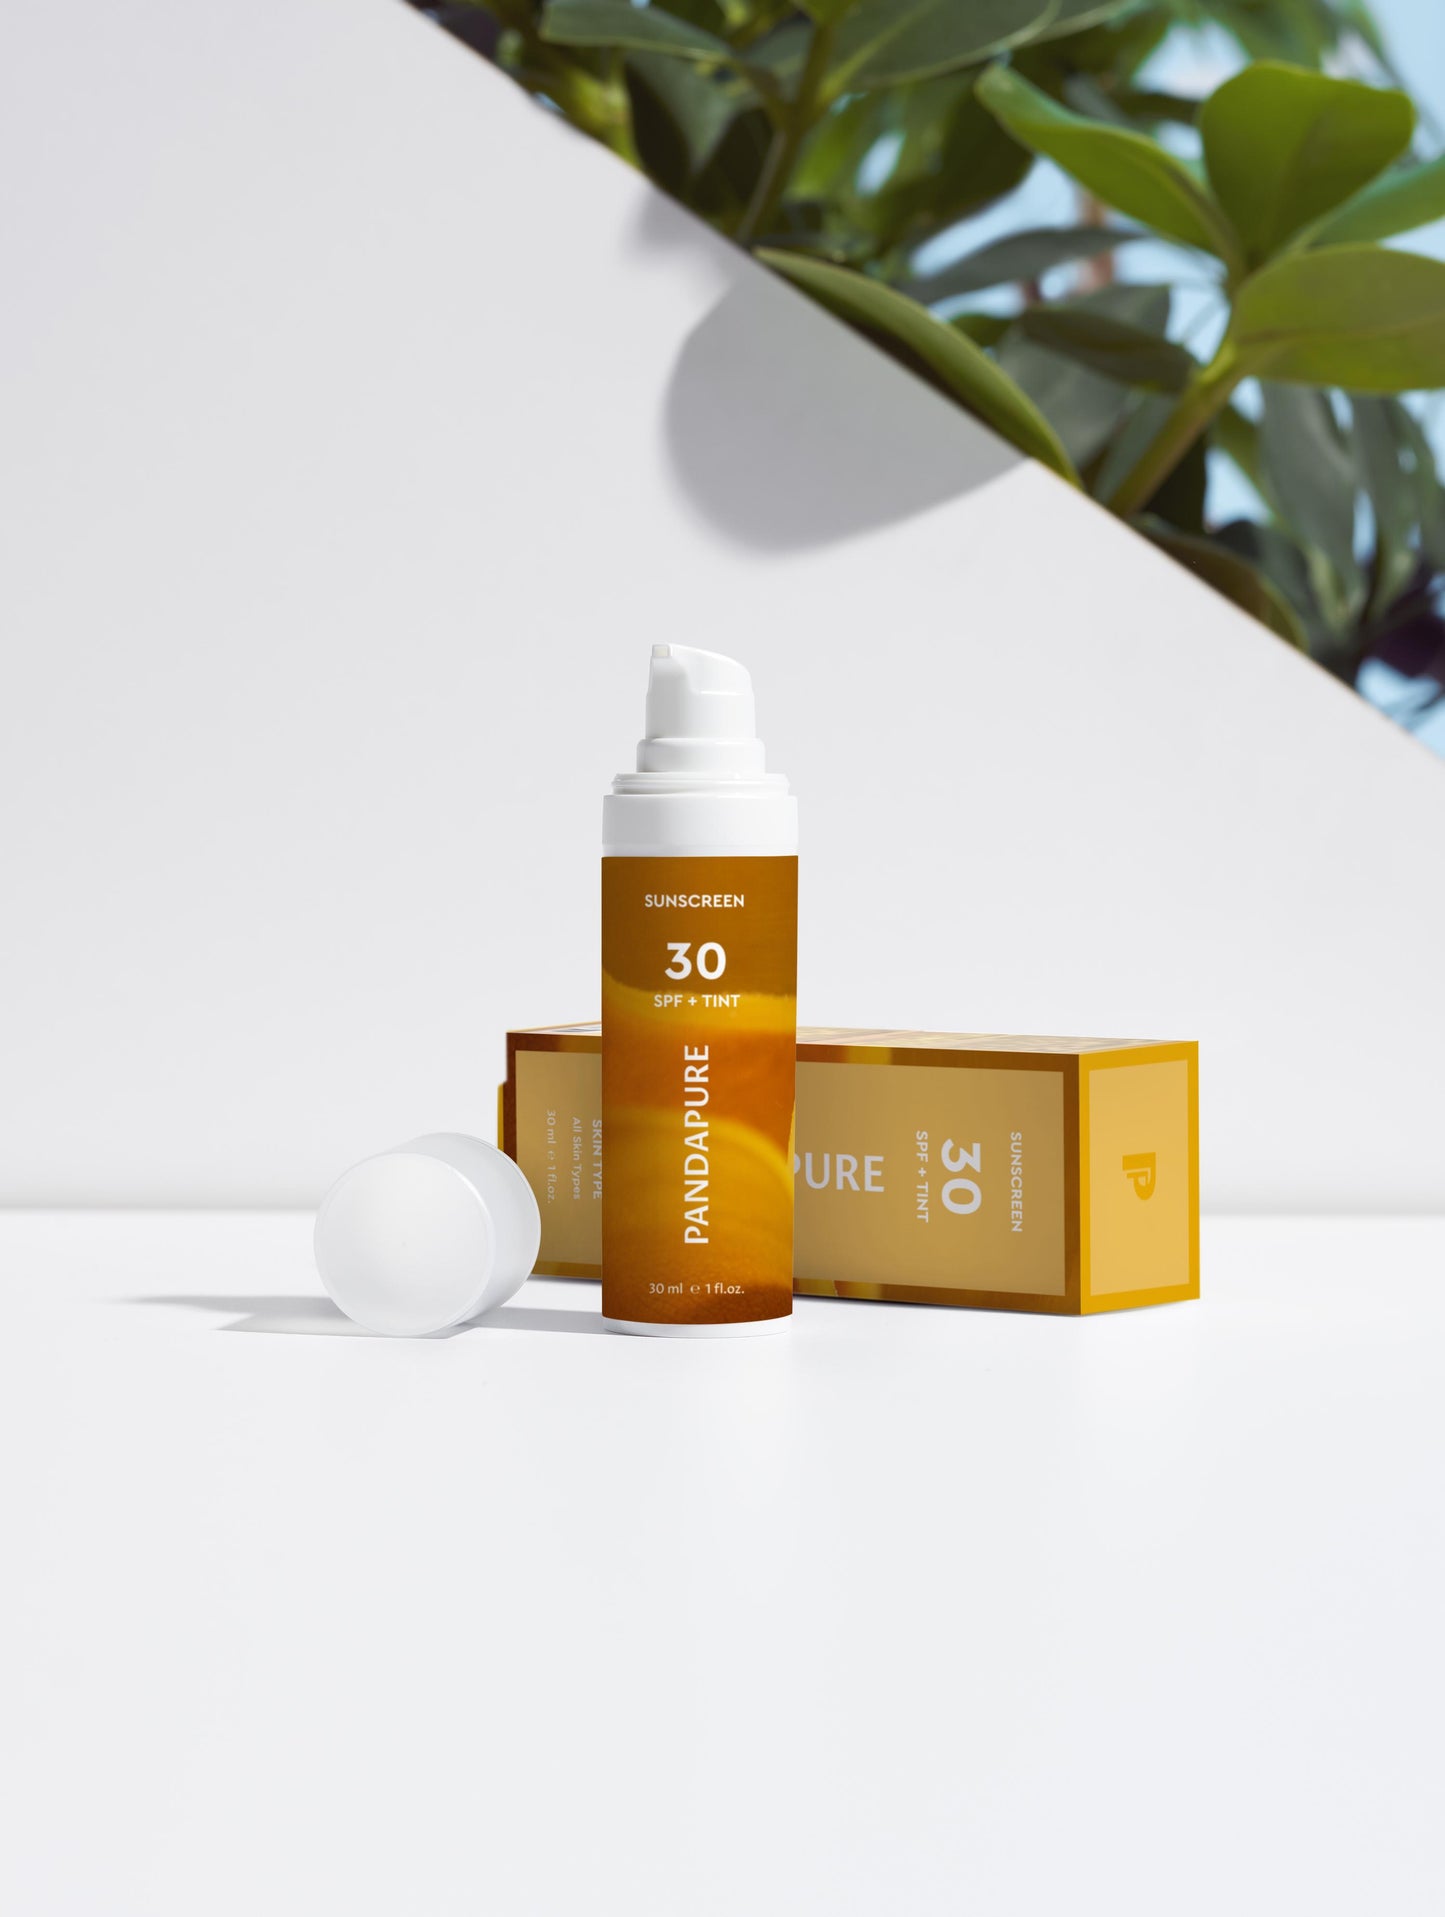 Sunscreen SPF30 with Tint